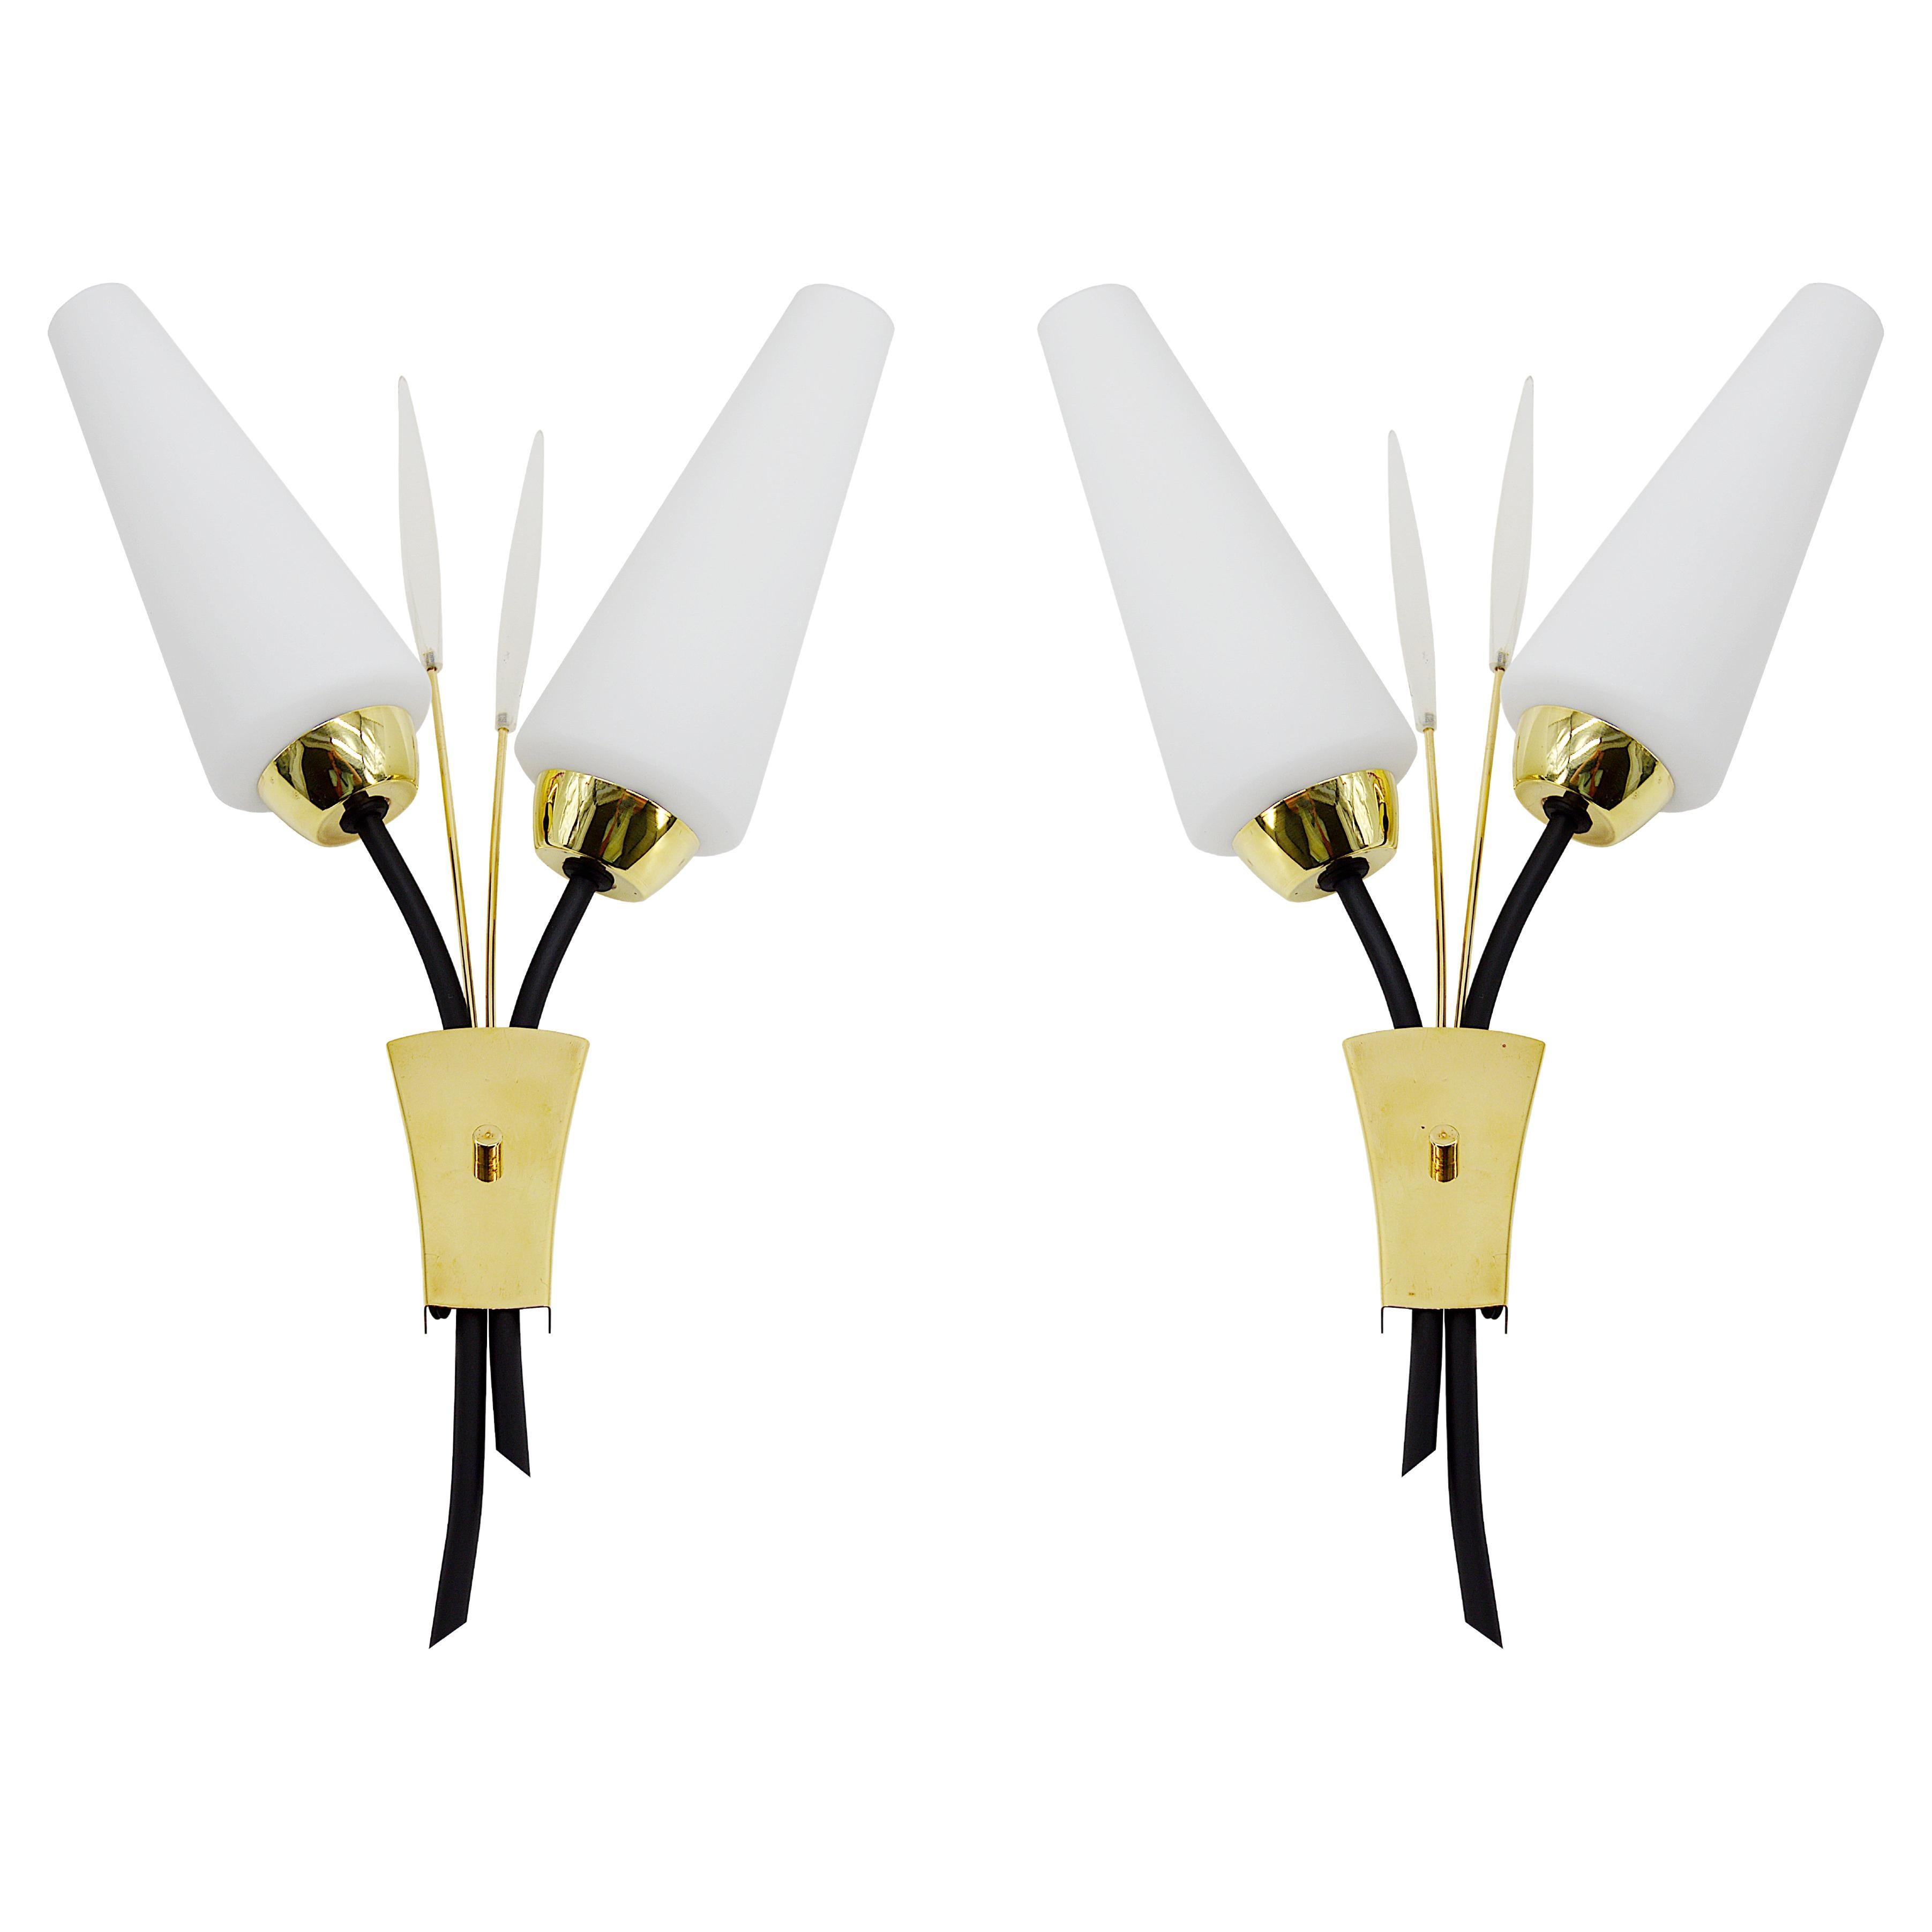 Lunel French Midcentury Wall Lights, Pair, 1950s For Sale